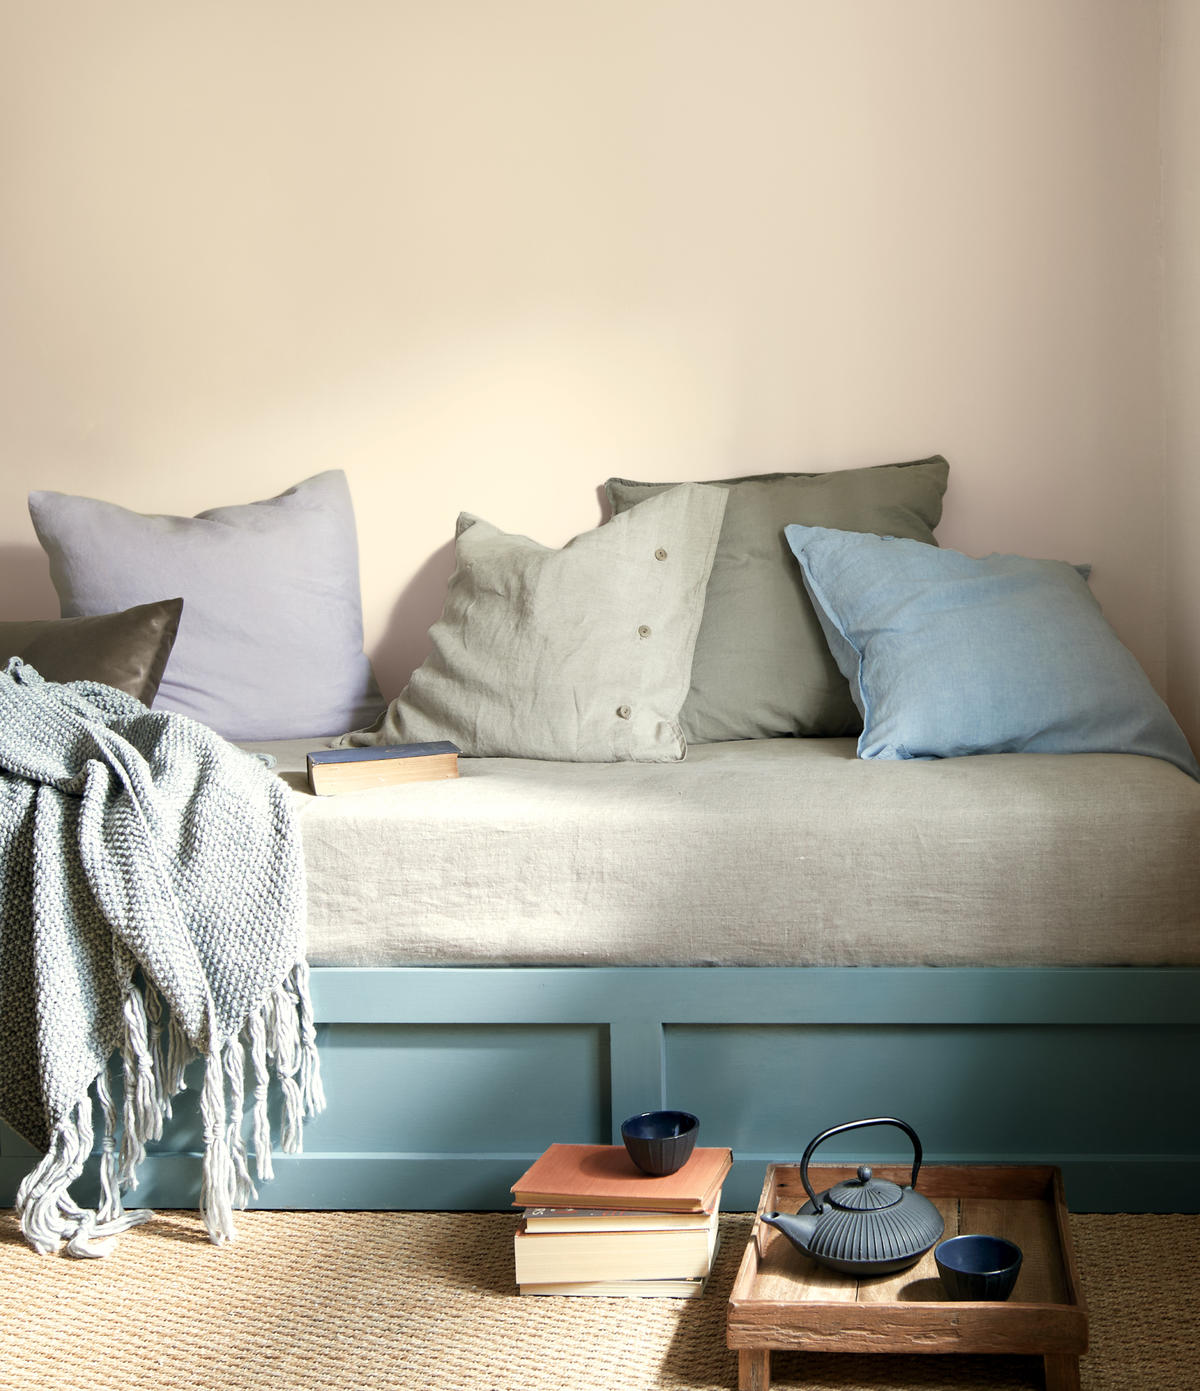 Aegean Teal paired back with Muslin, a Color Trends 2021 hue